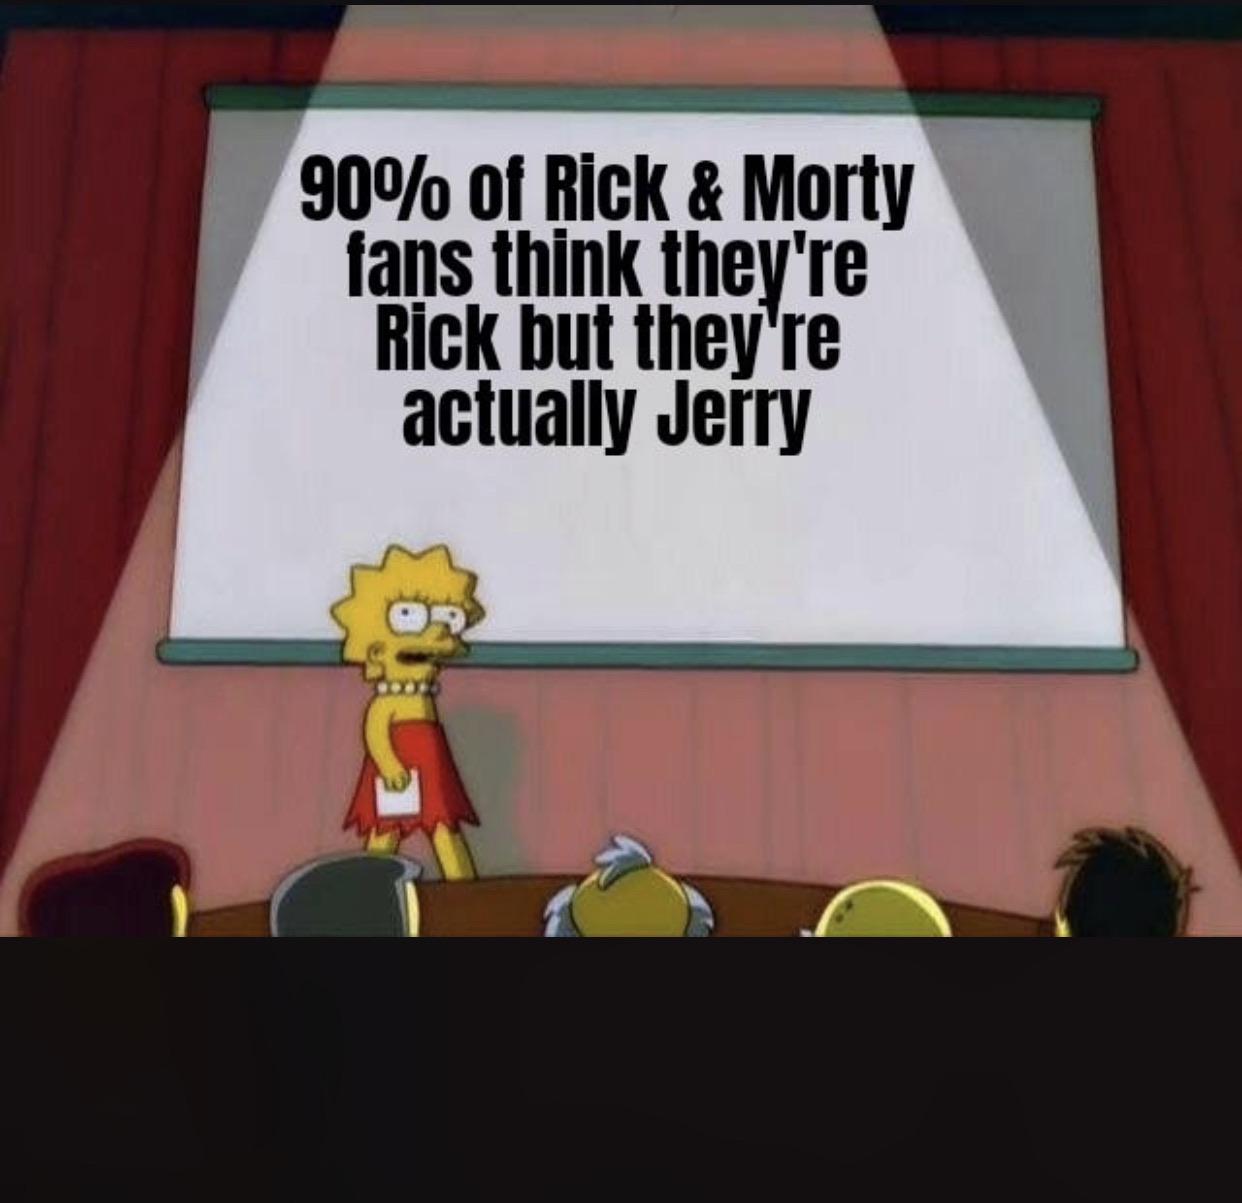 Dank, Jerry, Rick, Beth, Summer, Mr other memes Dank, Jerry, Rick, Beth, Summer, Mr text: 900/0 of Rick & Mort! fans think they're Rick but they re actUallY Jerry 